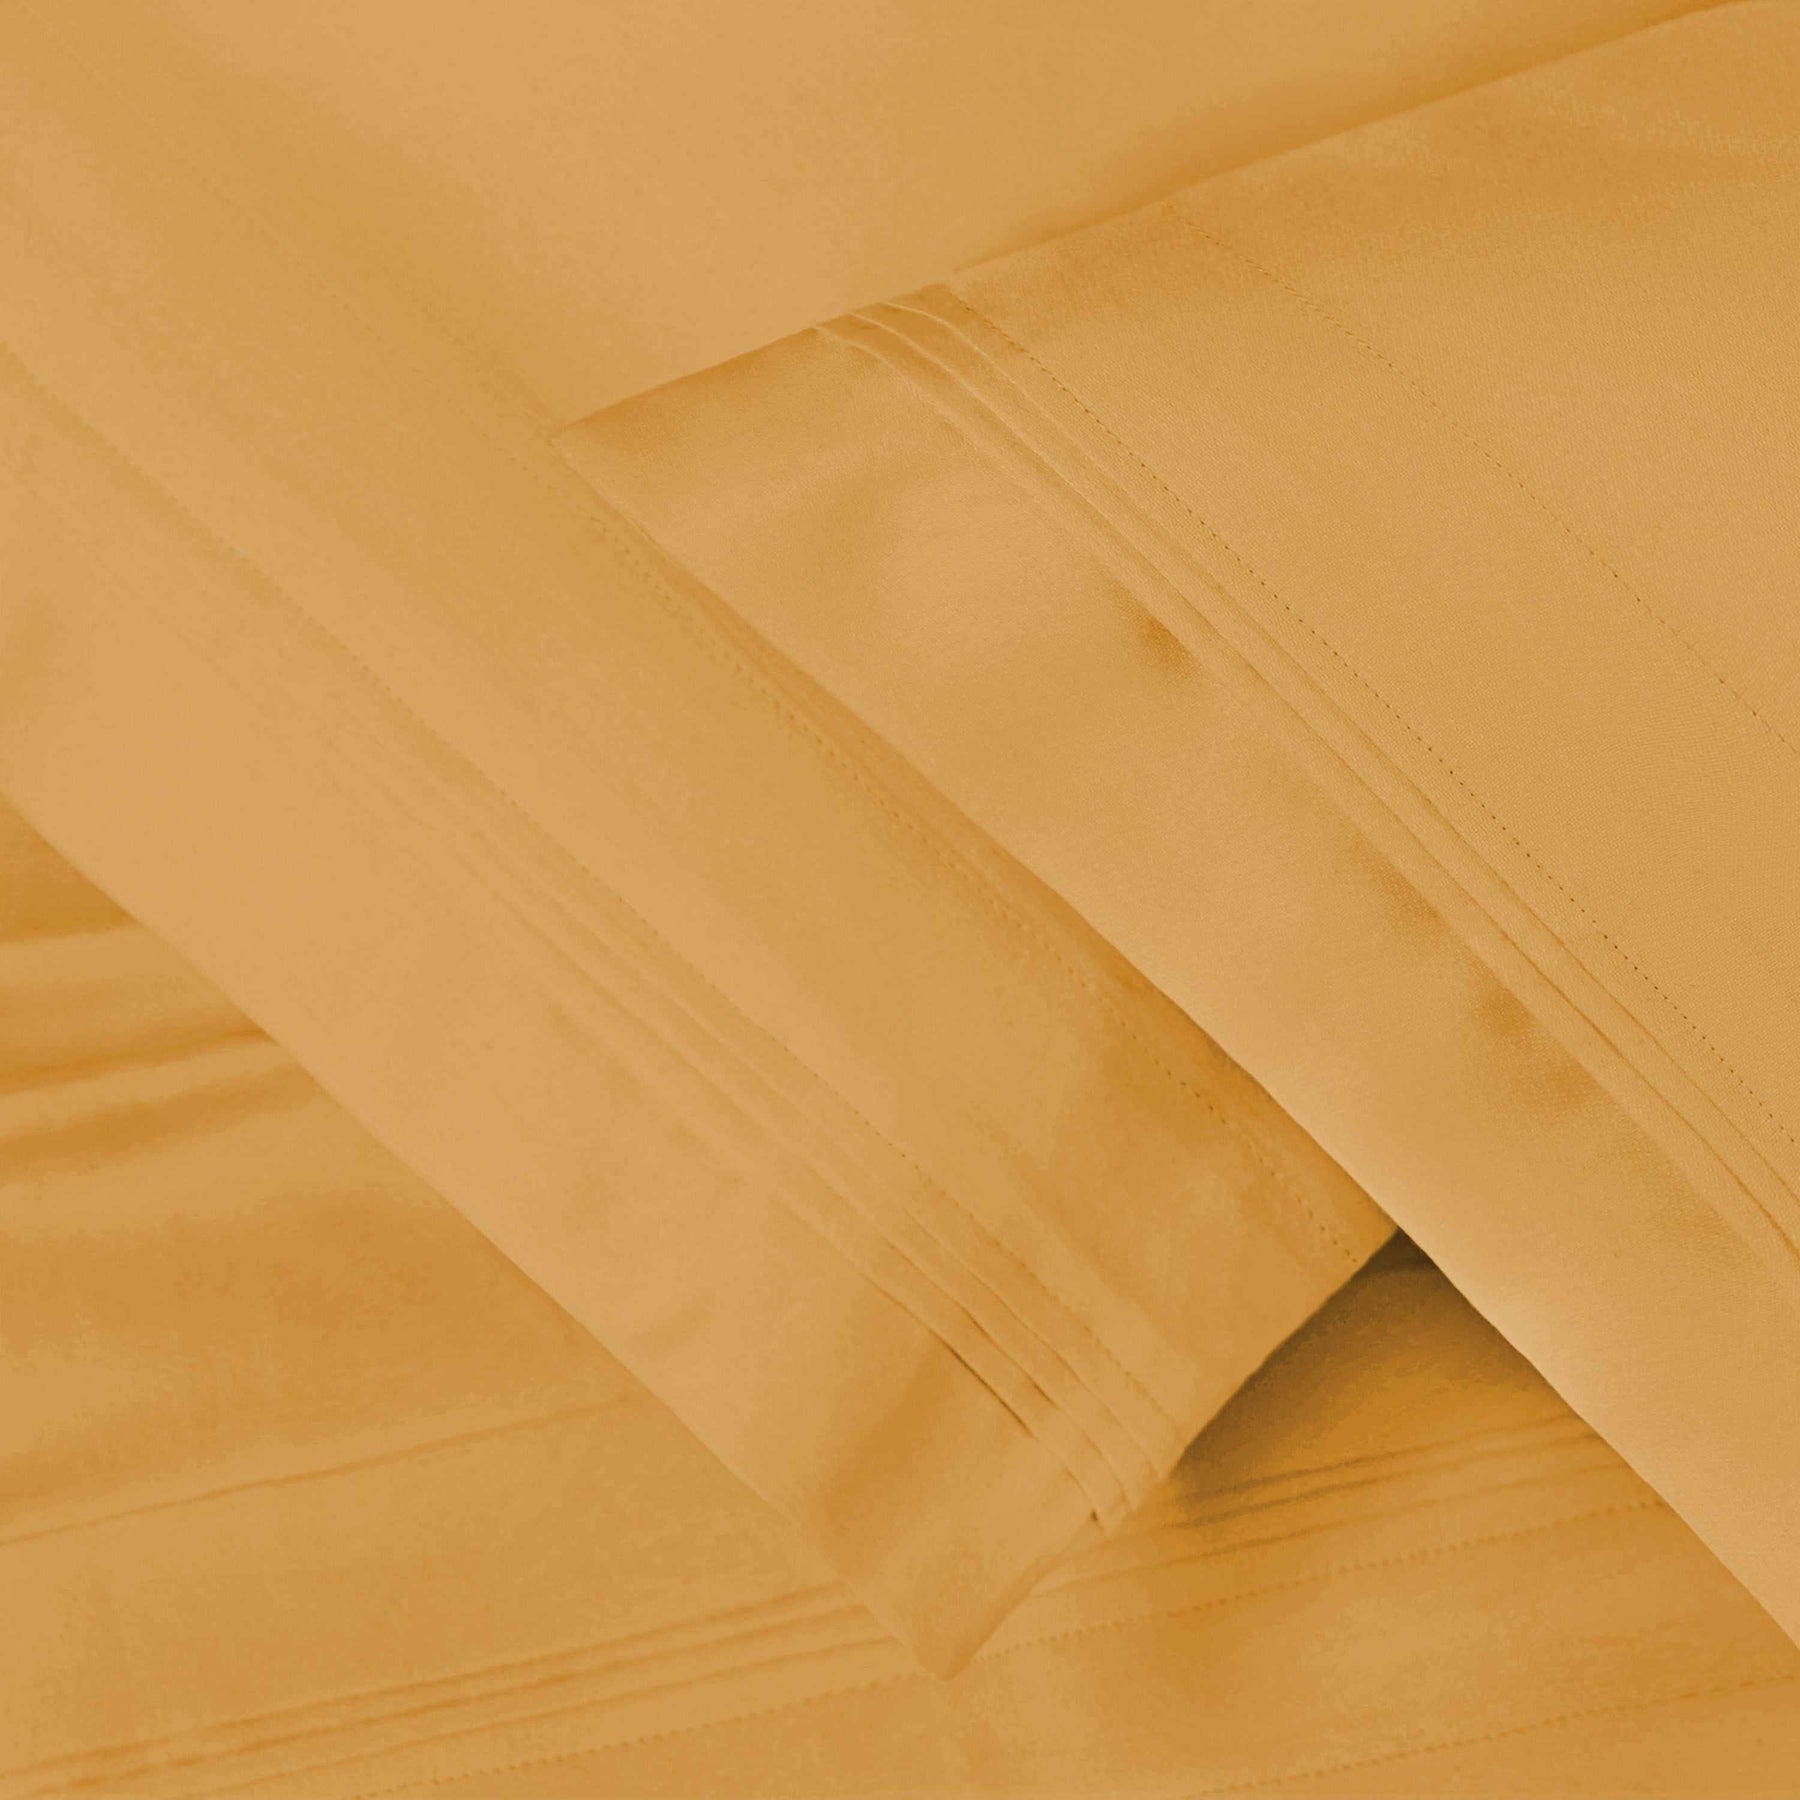 Solid 1500 Thread Count Egyptian Cotton 2-Piece Pillowcase Set - Gold